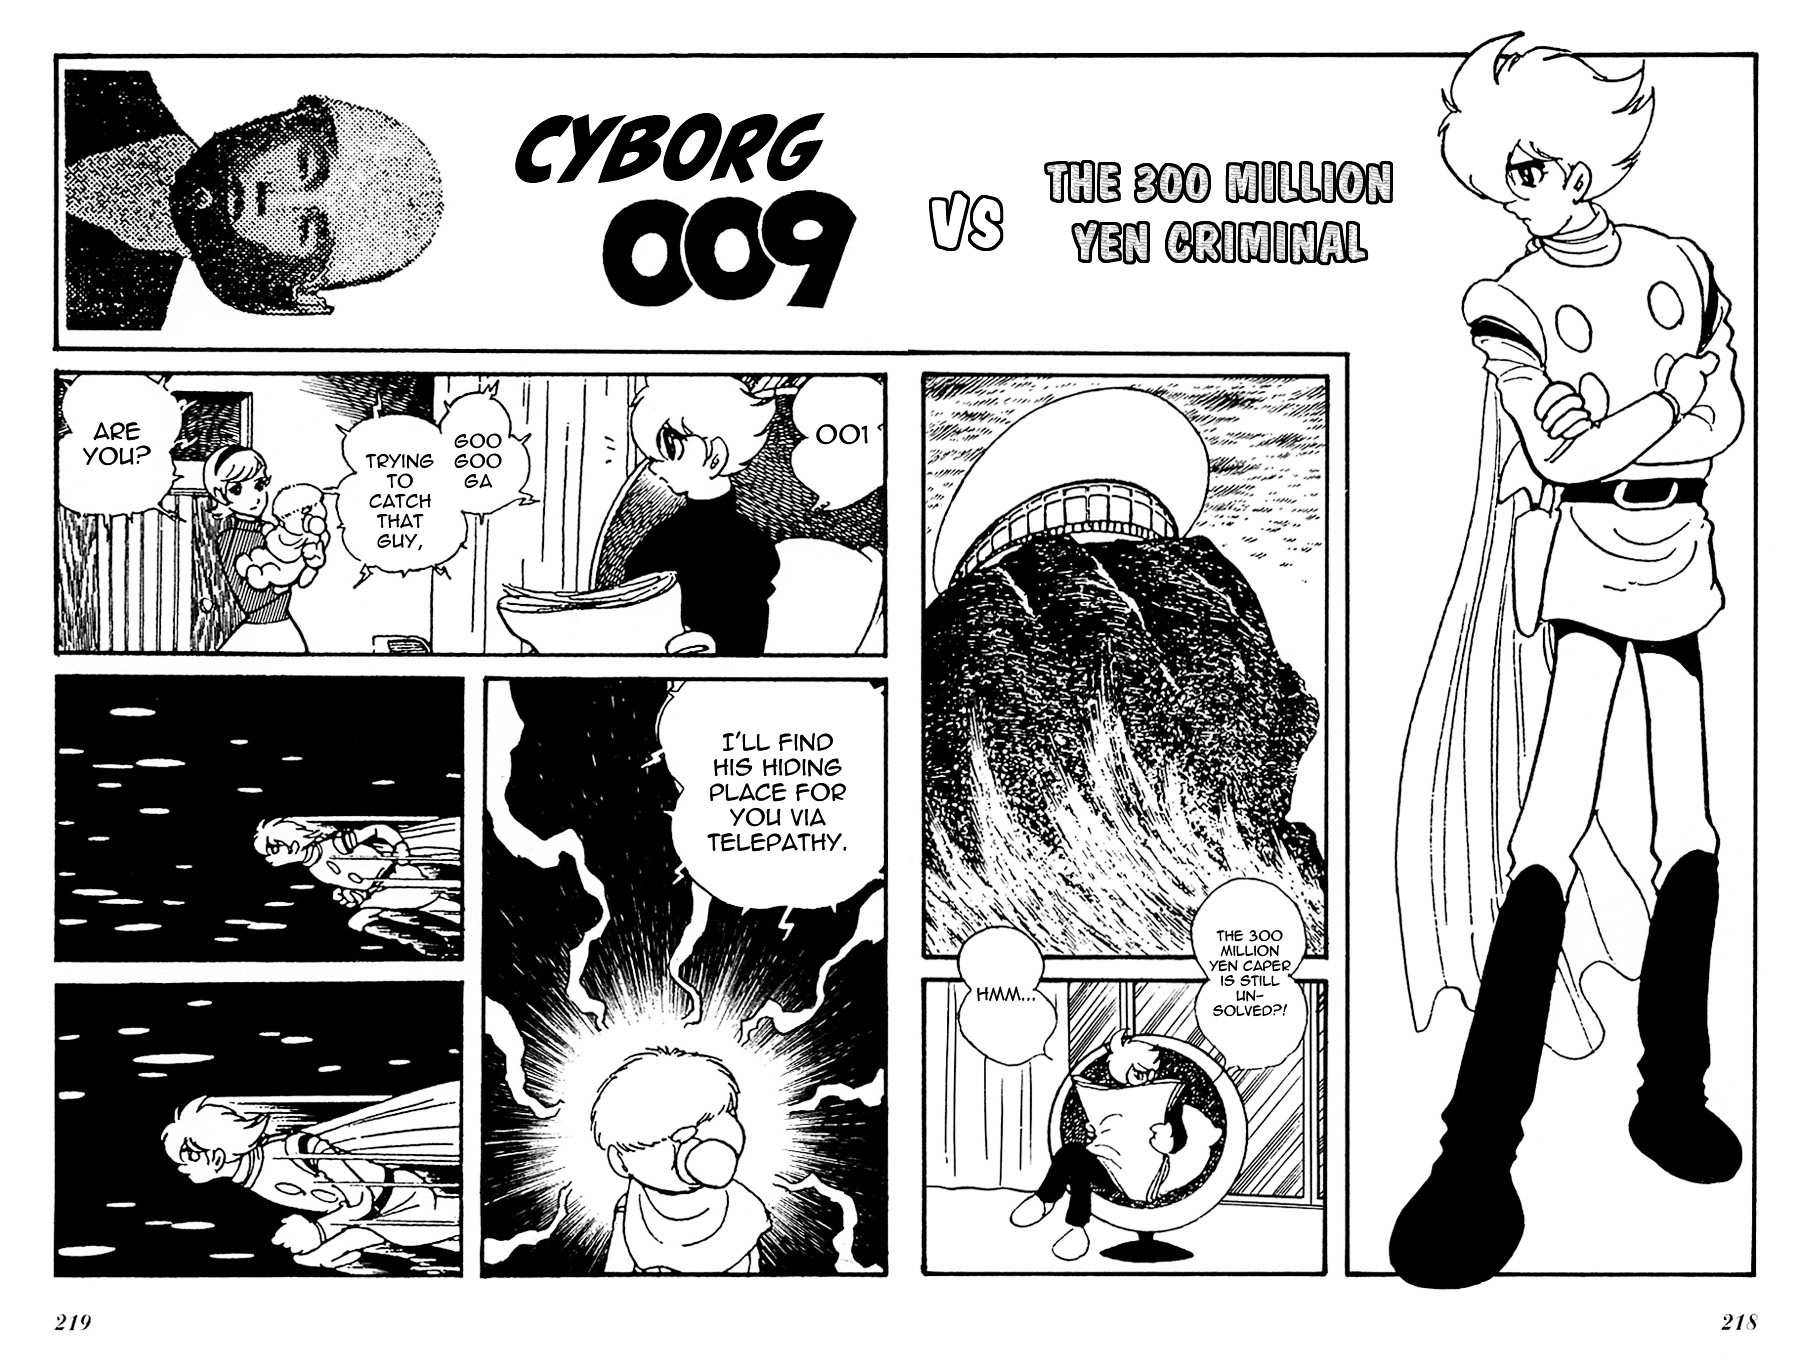 Cyborg 009 - Gold-Hen Vol.1 Chapter 8 : Cyborg 009 And The 300 Million Yen Criminal - Picture 2